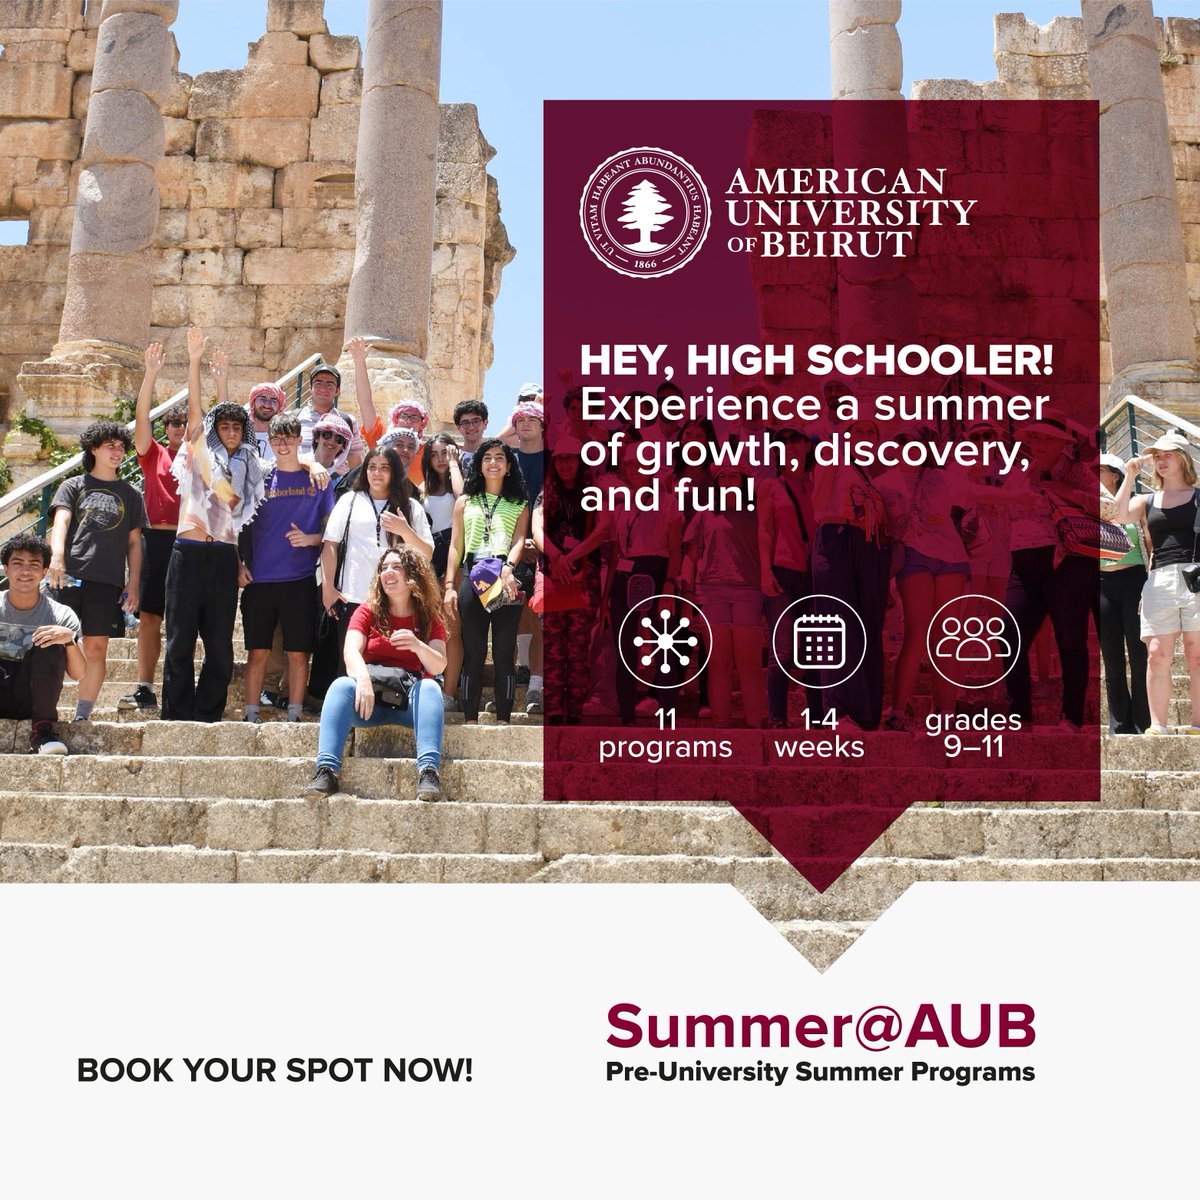 Hey, High Schooler! 🎓 Ready for a summer of growth, discovery, and fun? Explore our 11 diverse programs, ranging from 1-4 weeks, tailored for grades 9-11. Secure your spot now for an unforgettable experience! aub.edu.lb/cec/Summer@AUB…